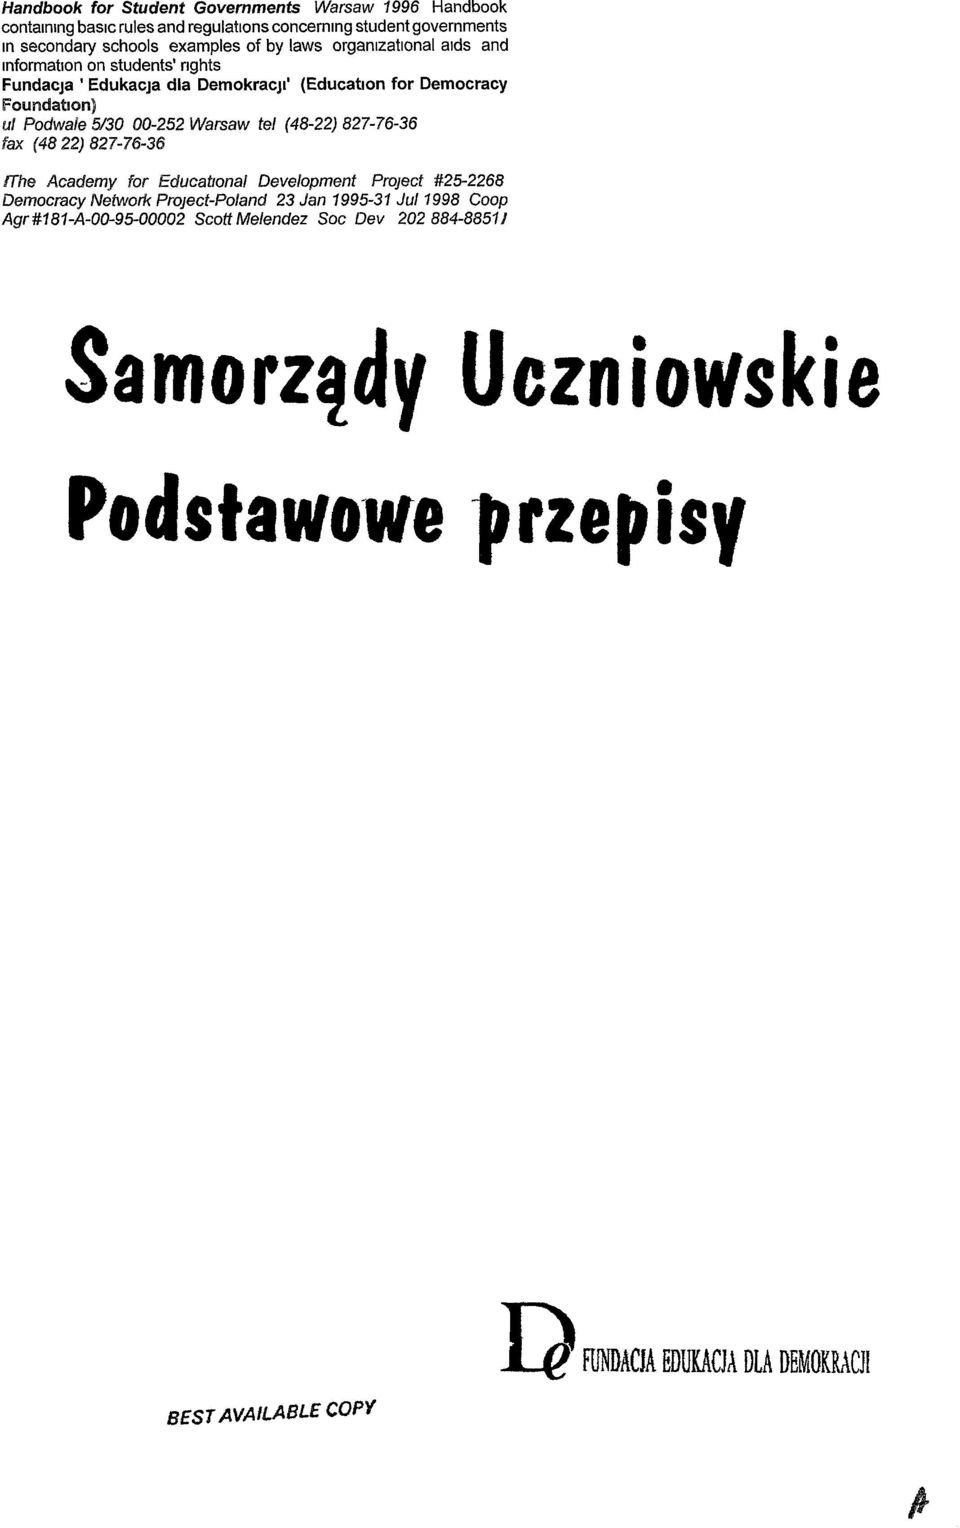 Warsaw tel (48-22) 827-76-36 fax (4822) 827-76-36 fthe Academy for EducatlOnal Development Project #25-2268 Democracy Network Project-Poland 23 Jan 1995-31